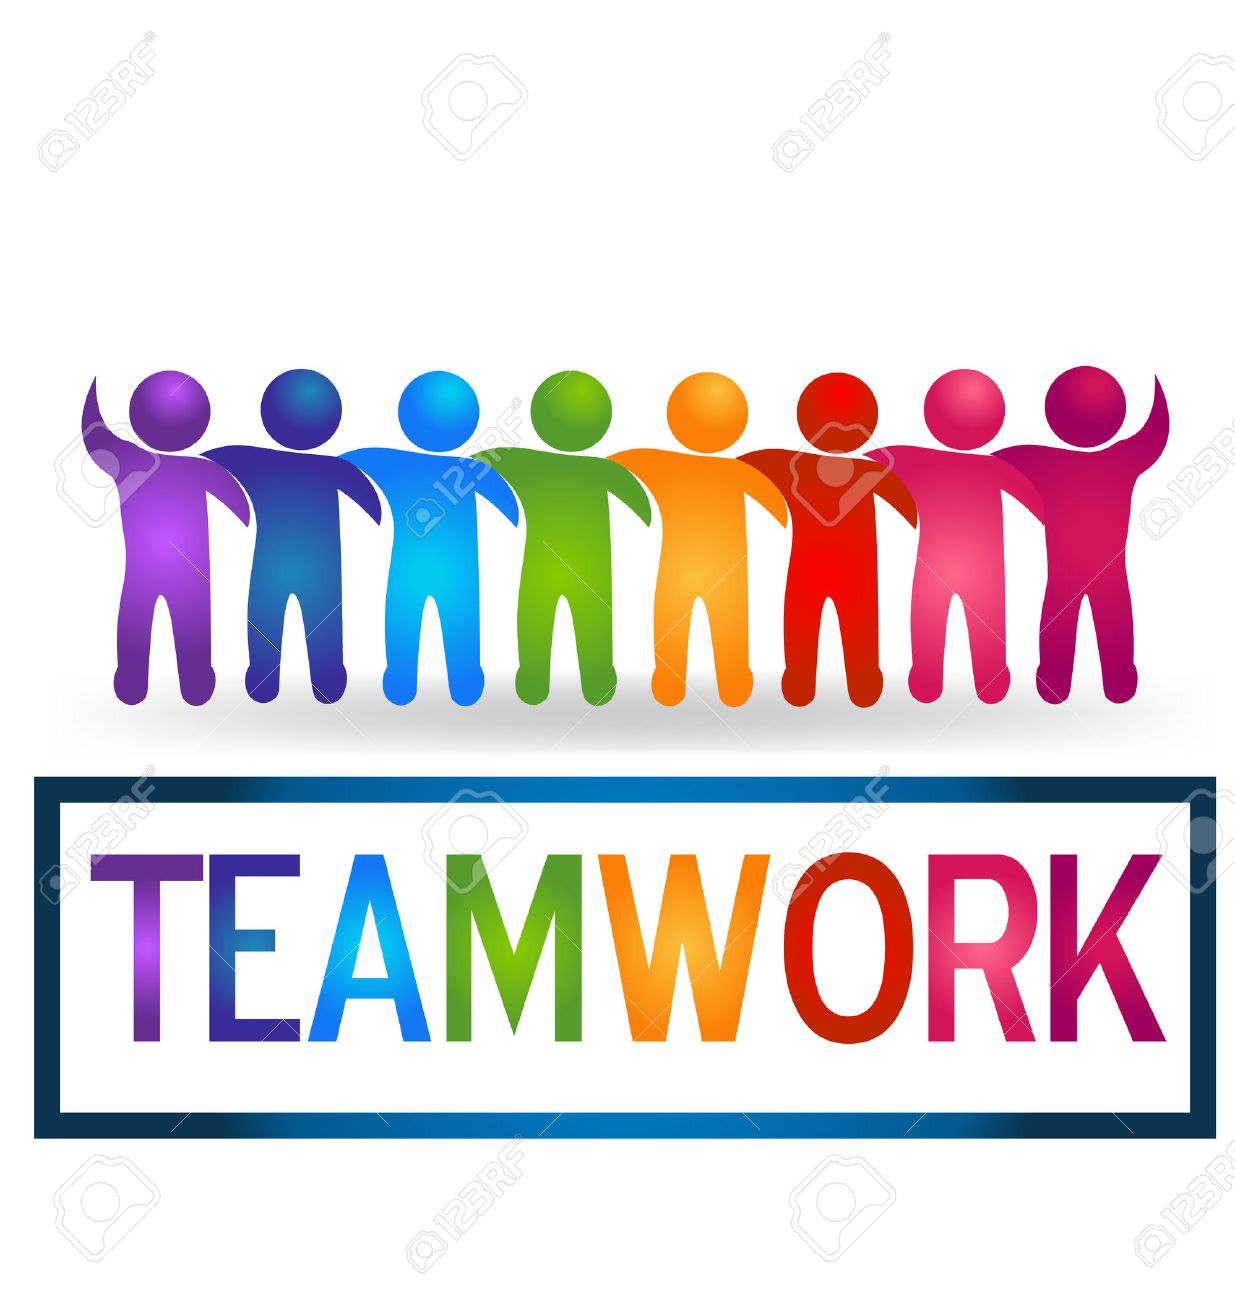 Free Teamwork Clipart Download Clip Art Cliparting Co - vrogue.co